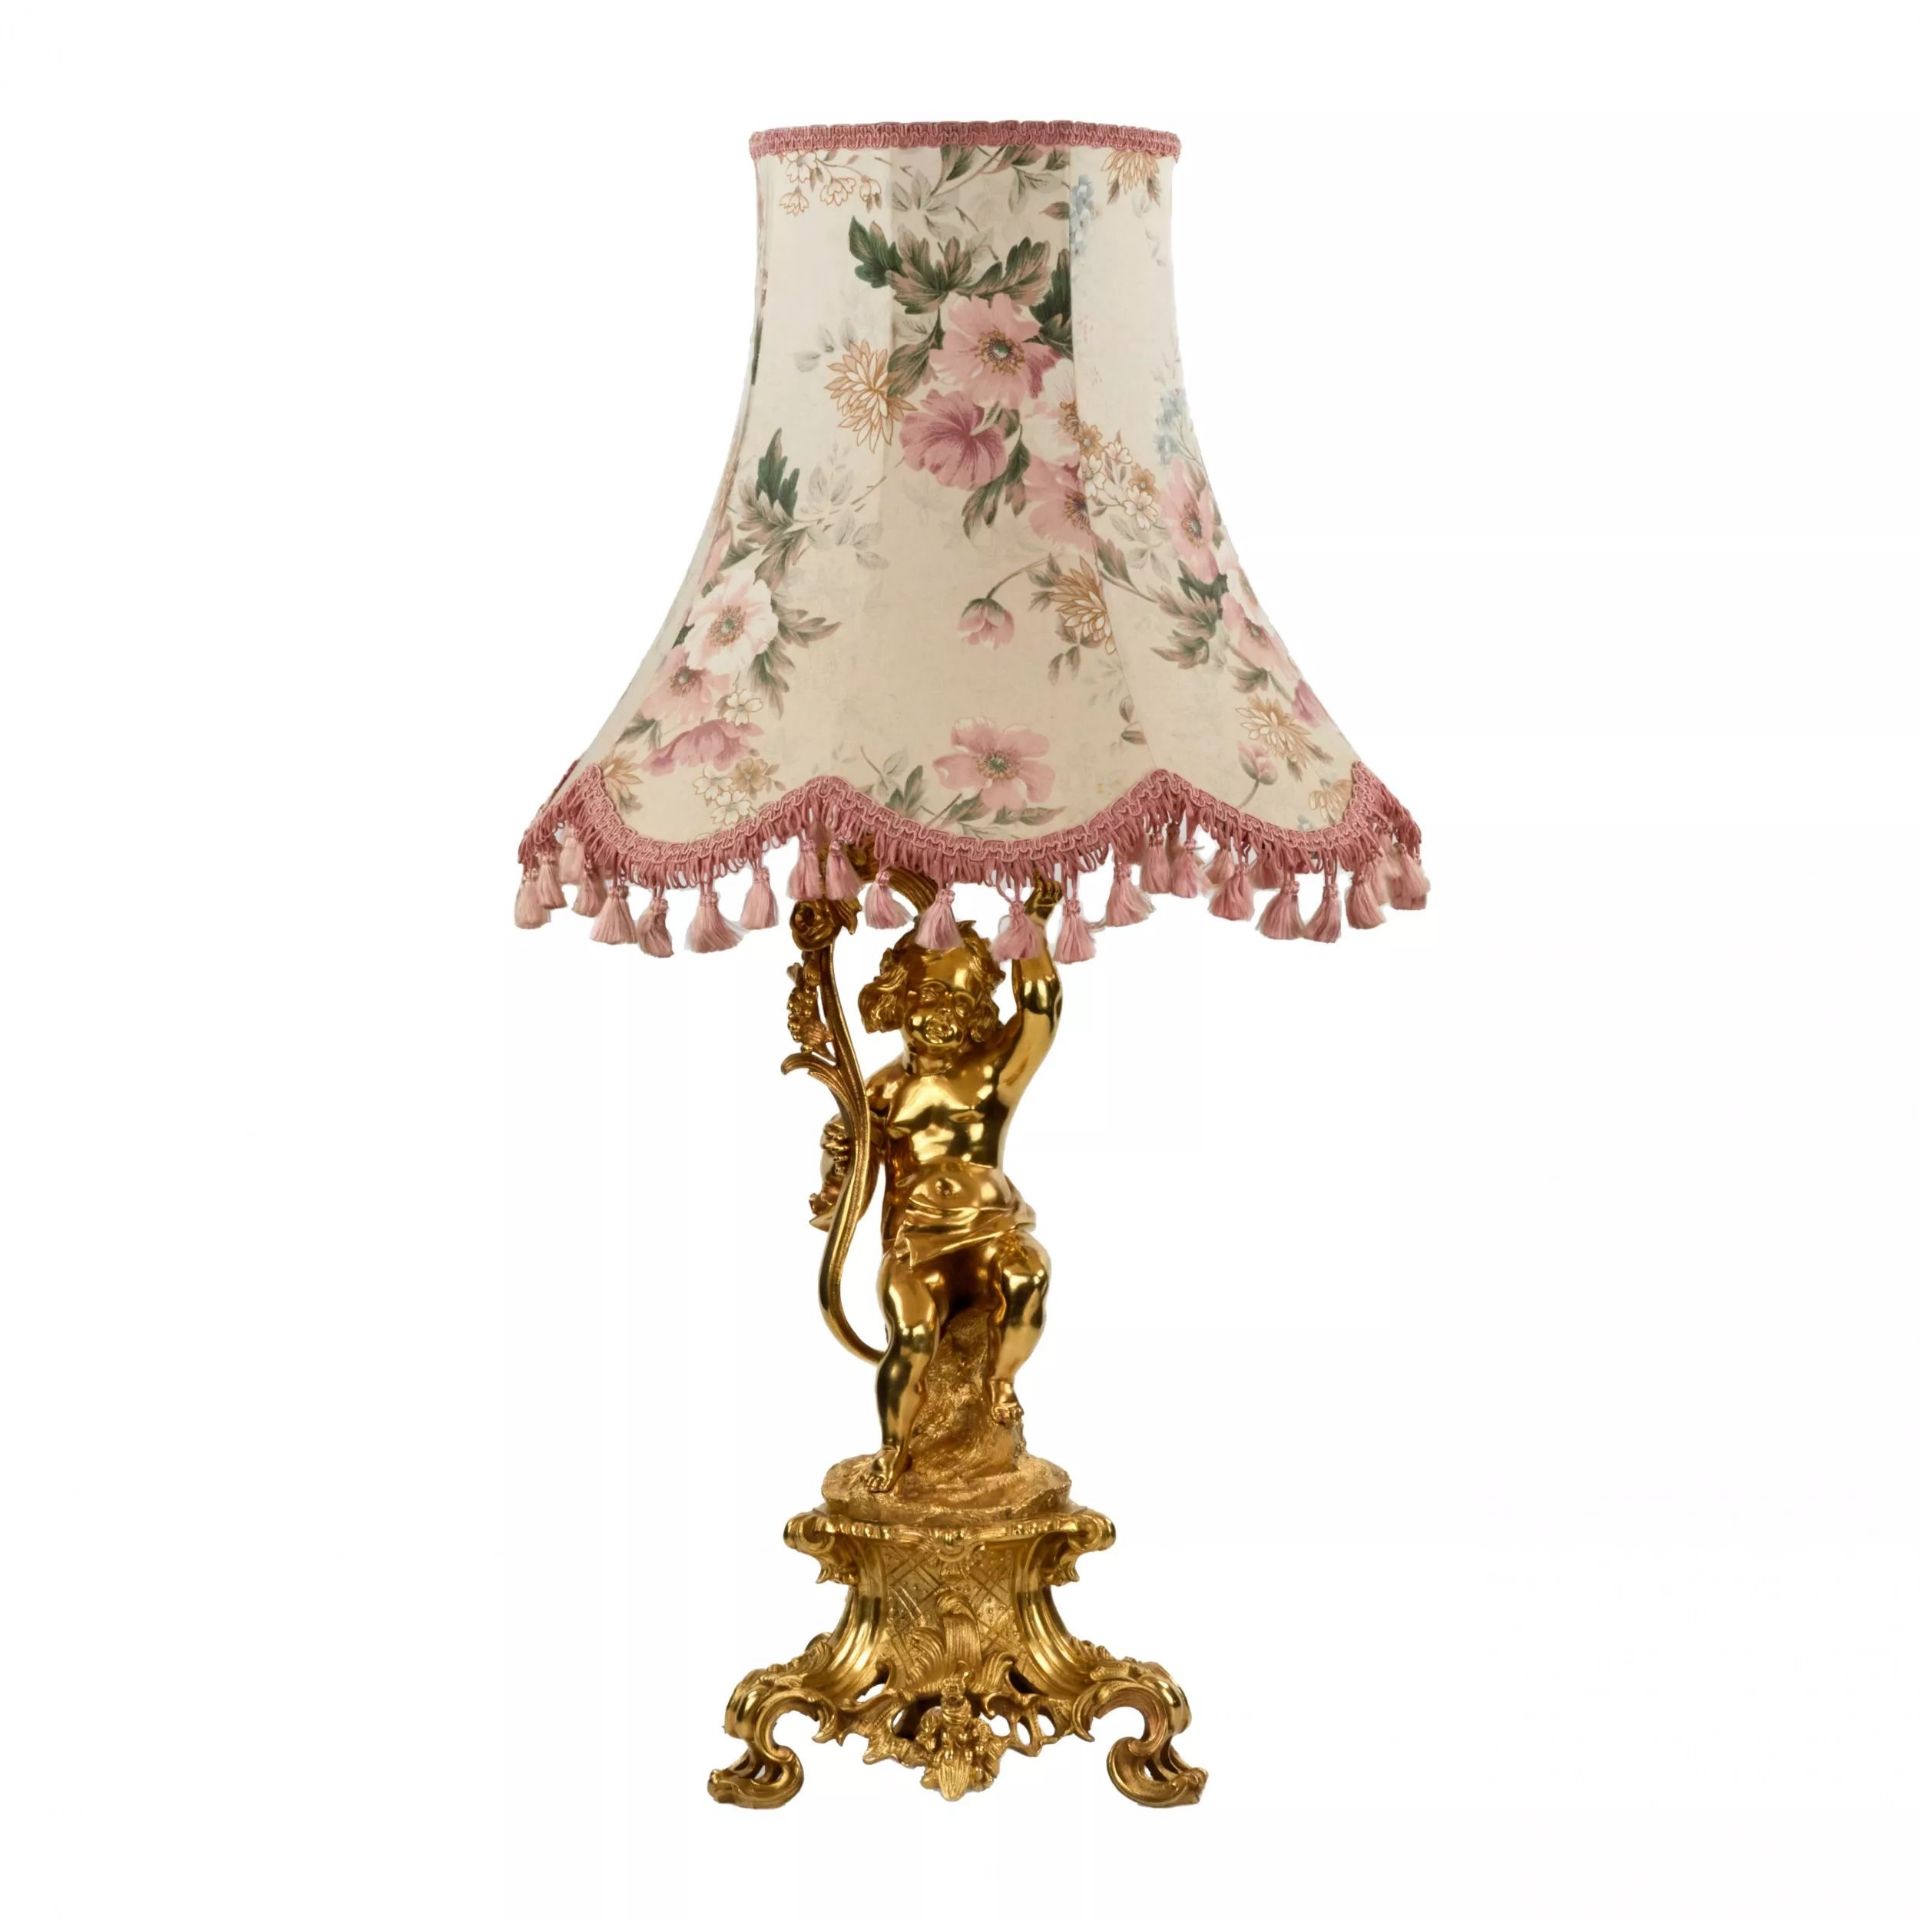 Gilded bronze lamp in the neo-rococo style.